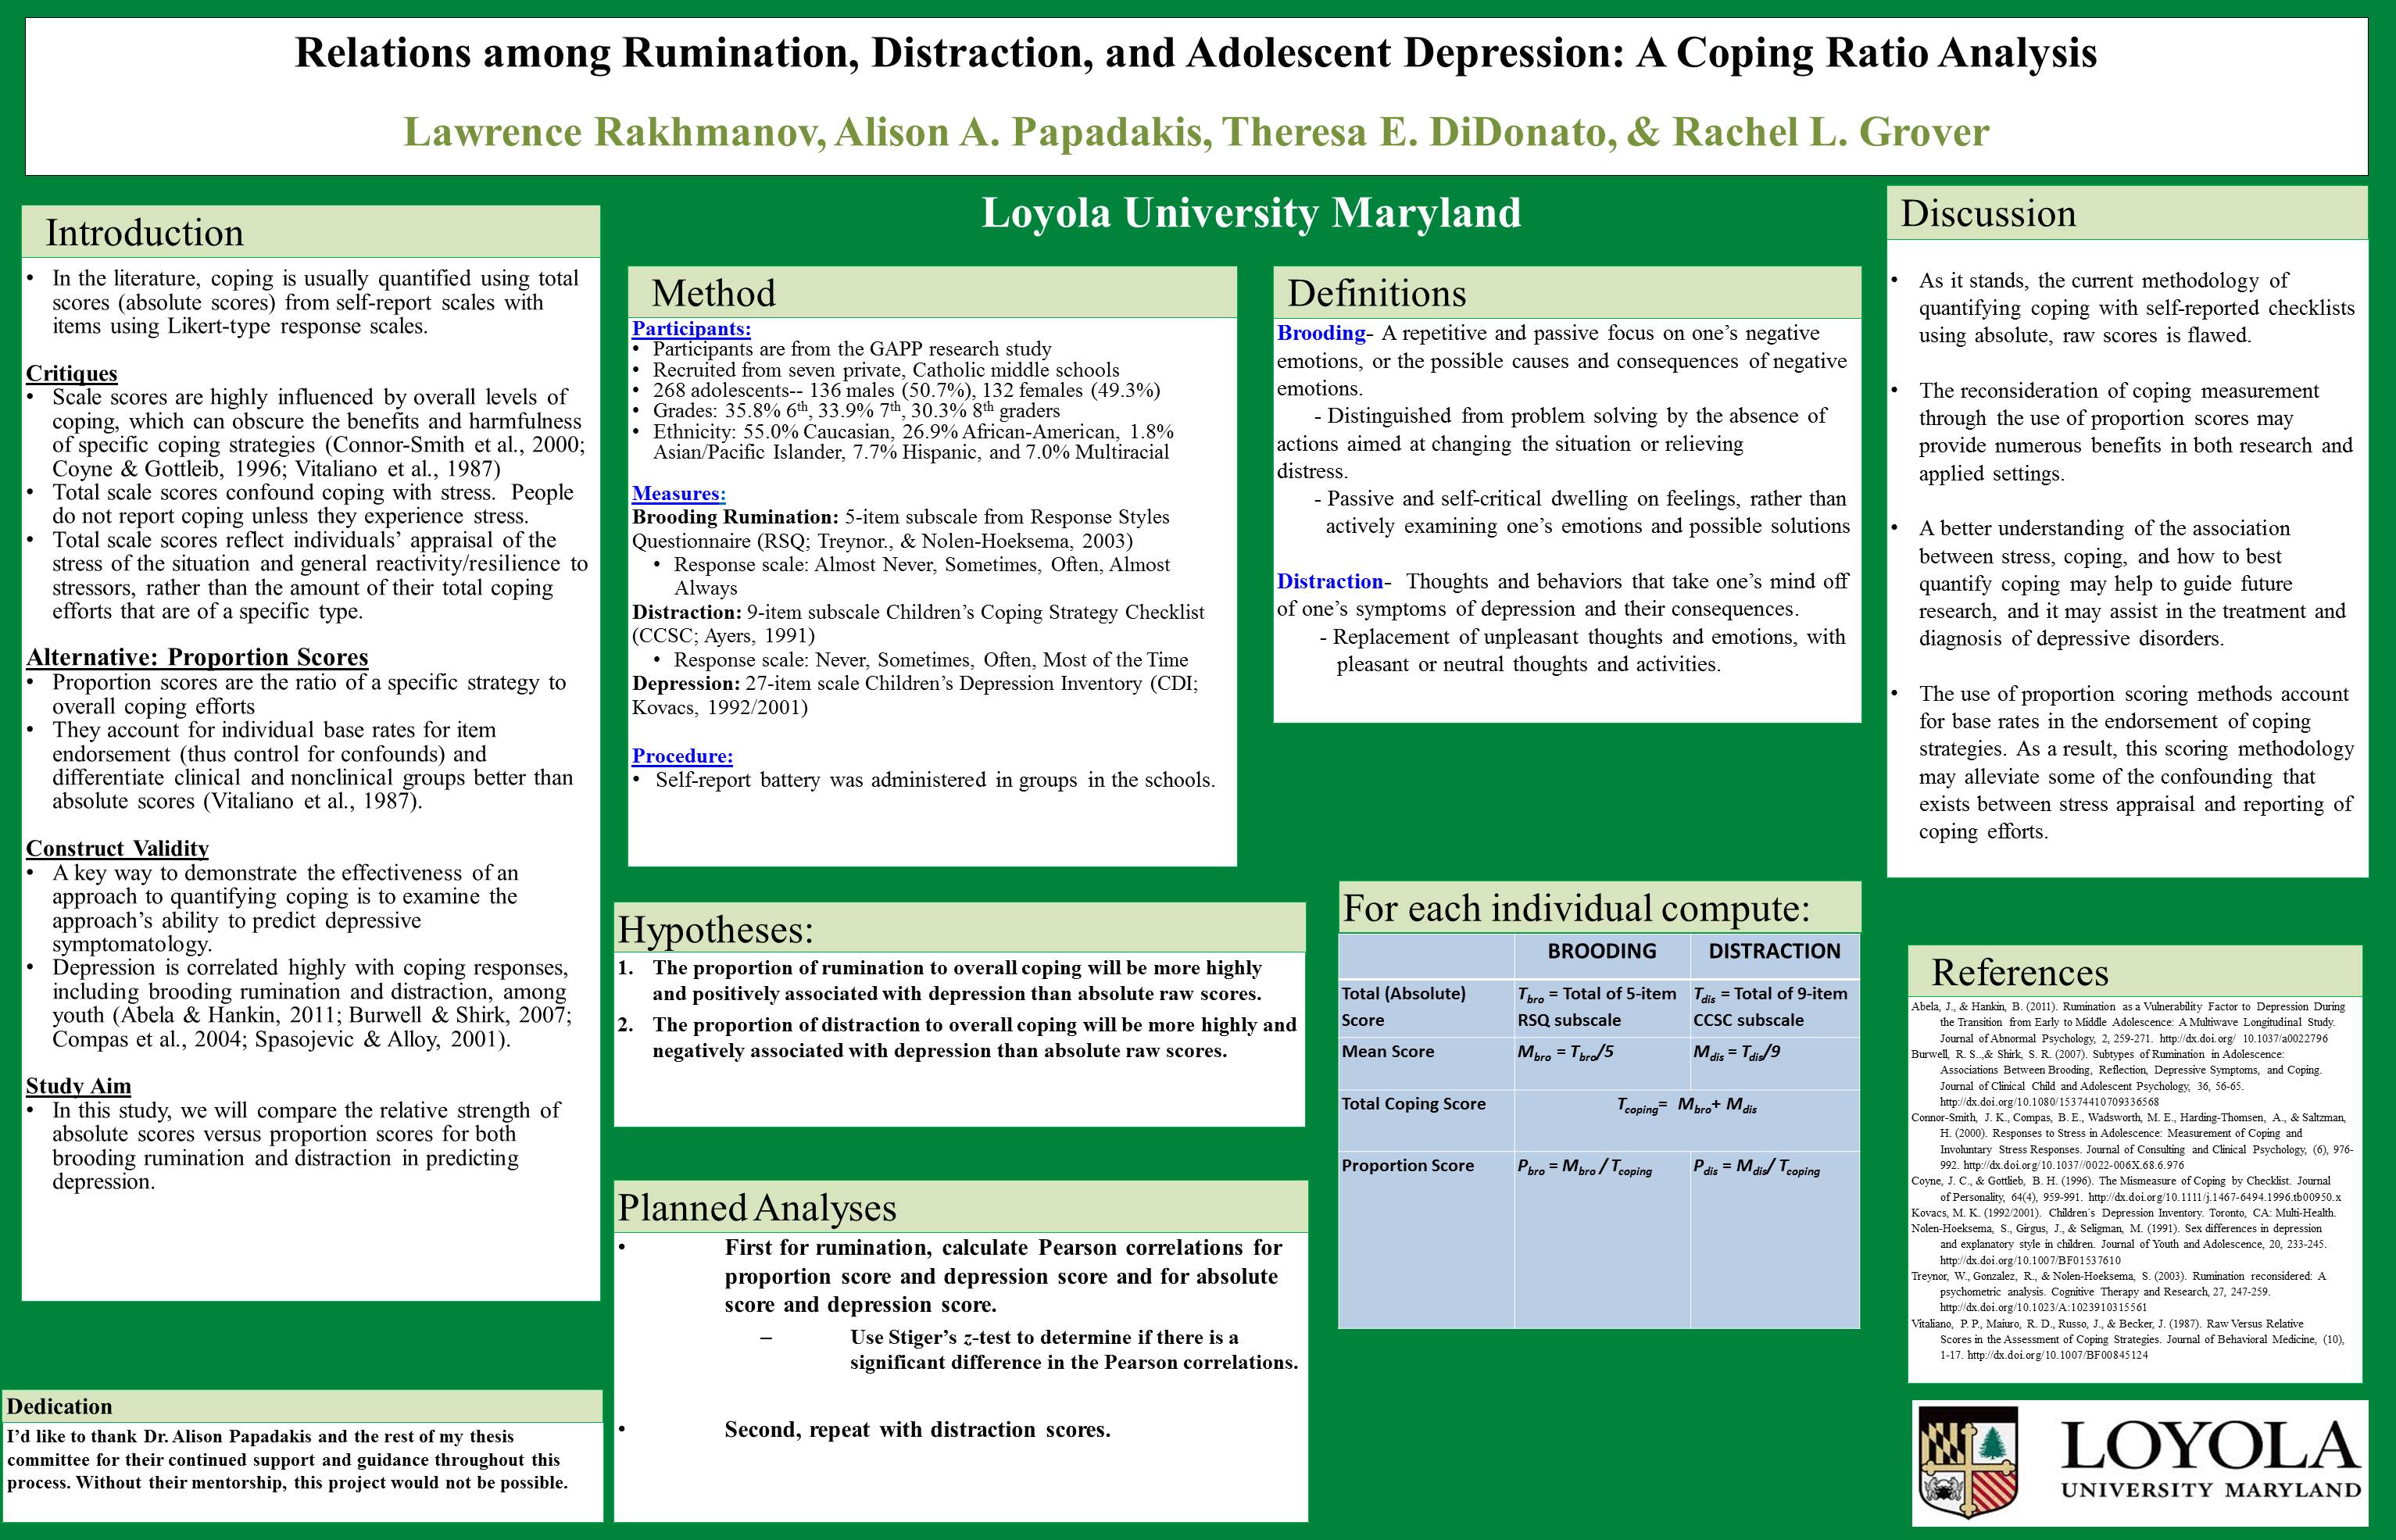 poster image: 'Relations among Rumination, Distraction and Adolescent Depression: A Coping Ratio Analysis'